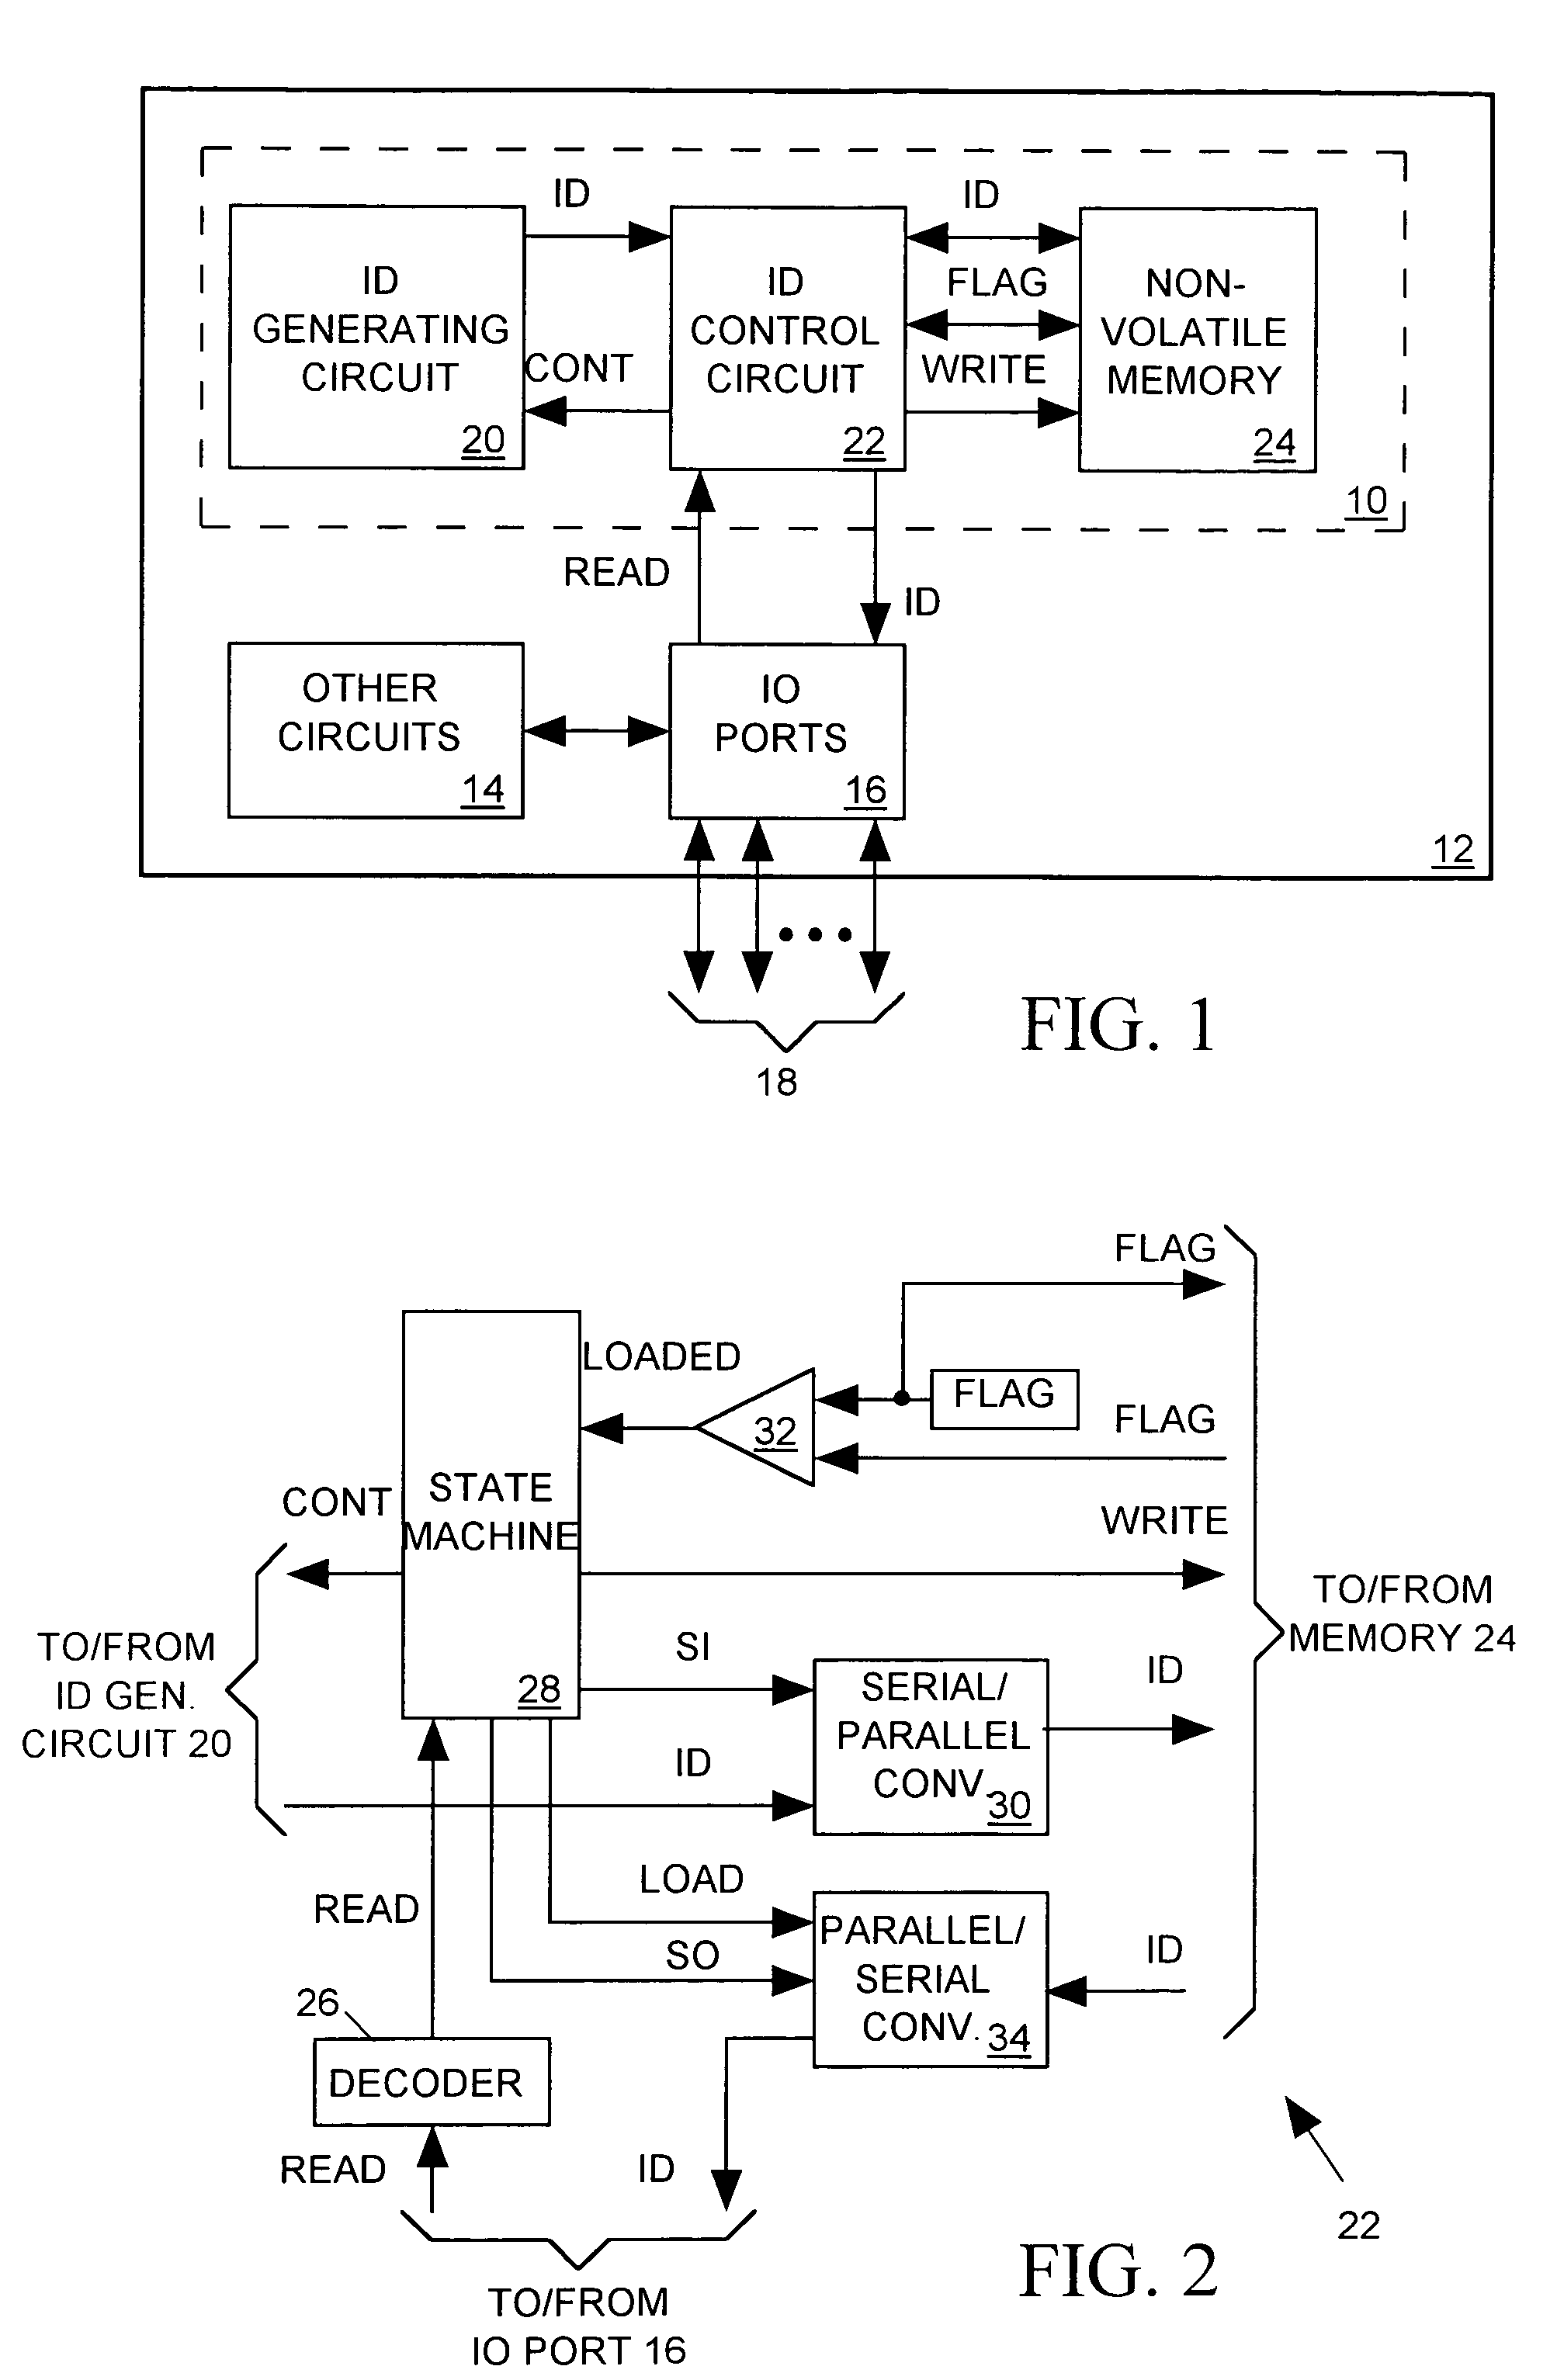 Circuit for generating an identification code for an IC